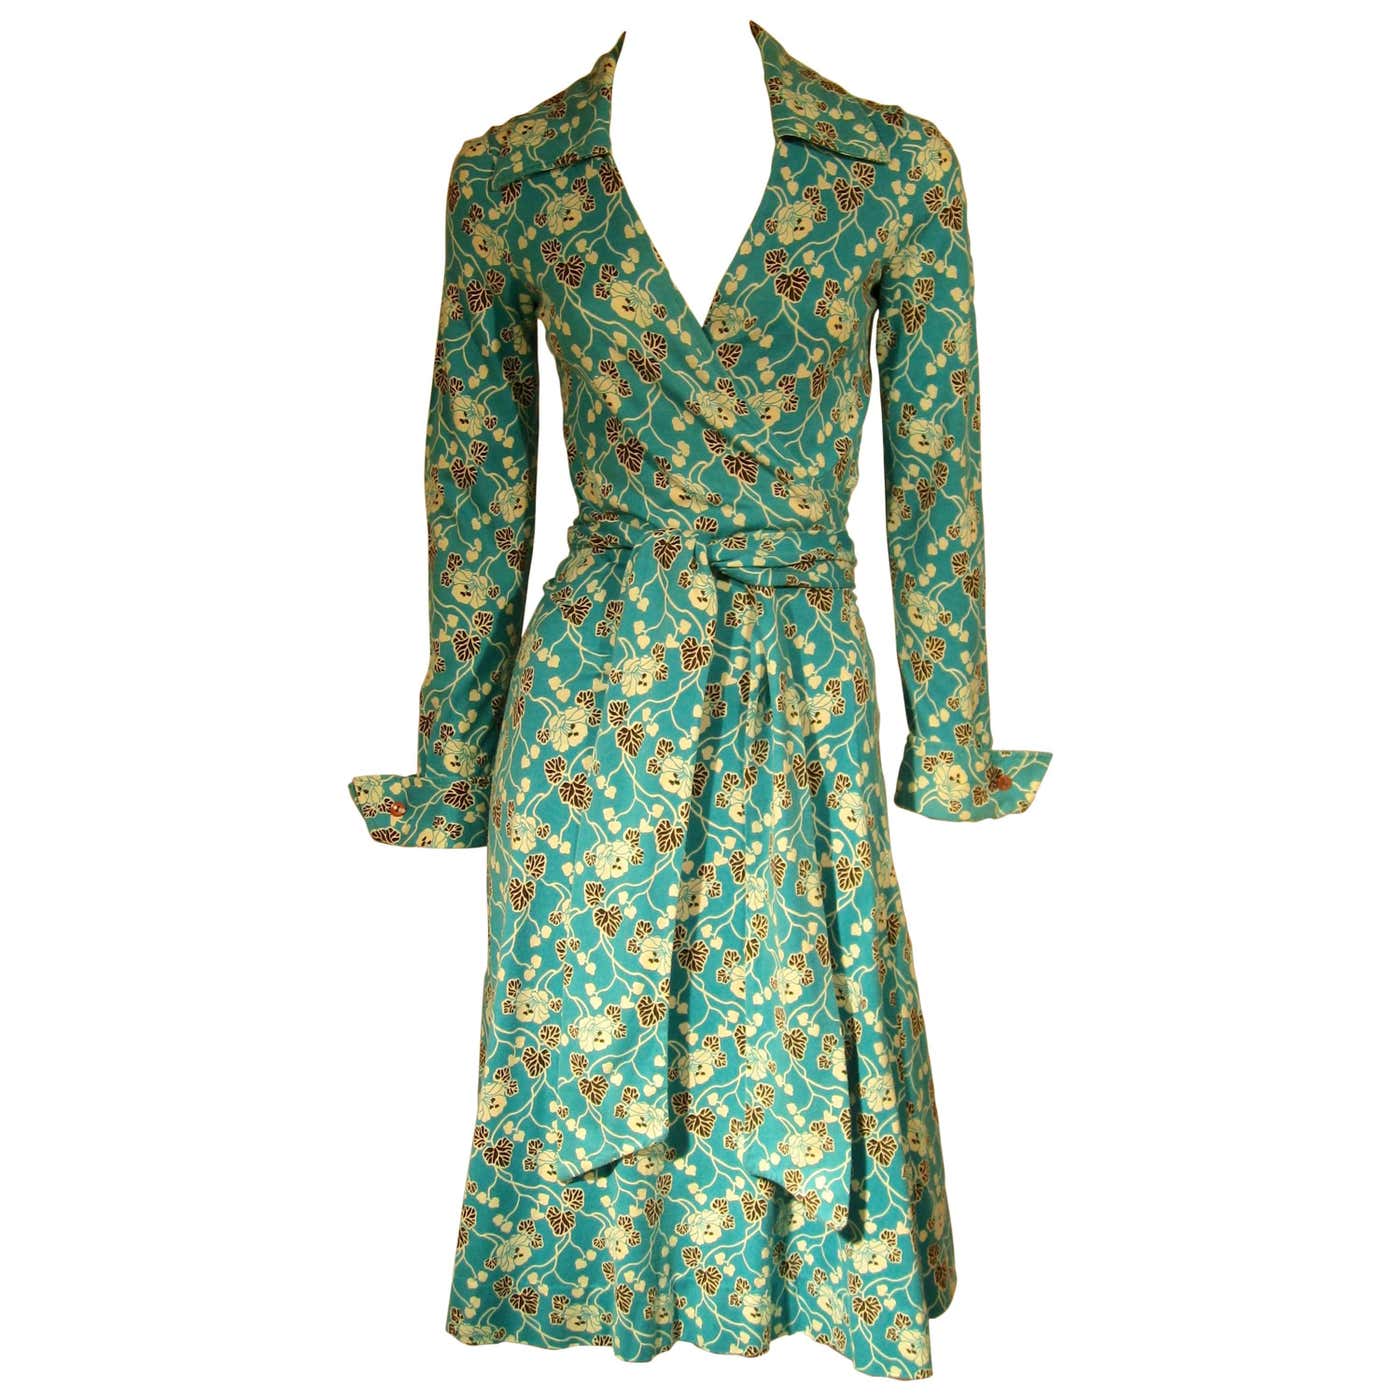 Iconic 1970s Diane von Furstenberg Turquoise Wrap Dress For Sale at ...